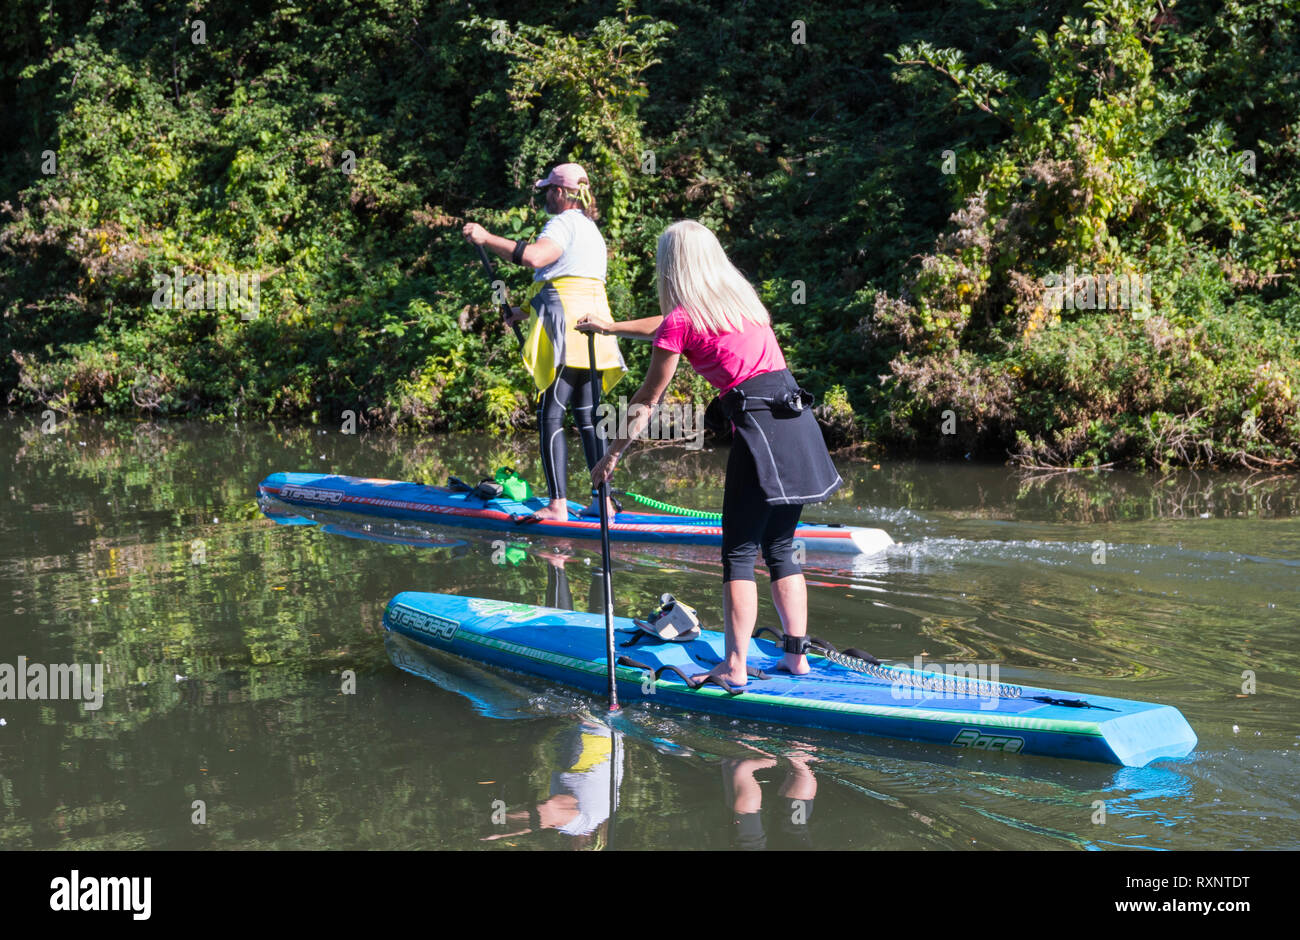 Mann und Frau auf Paddle Boards auf Kanal Chichester, West Sussex, UK. Paar Leute Paddle Boarding im Sommer. Paddleboard. Paddleboards. Stockfoto